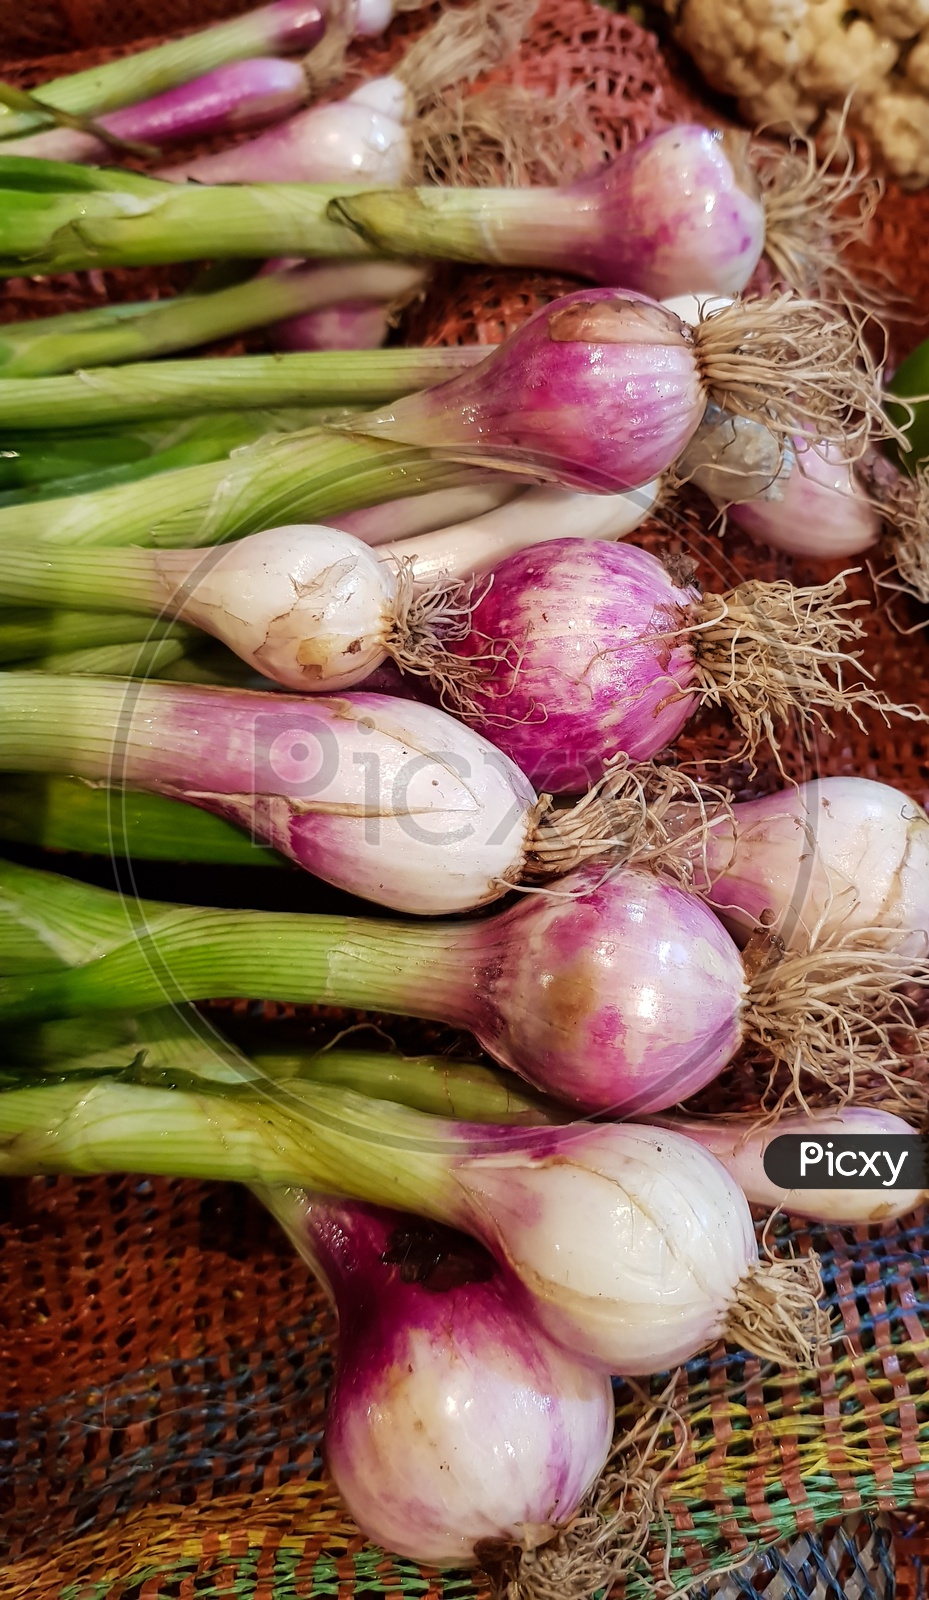 Spring Onion Roots In Vegetable Market For Sale